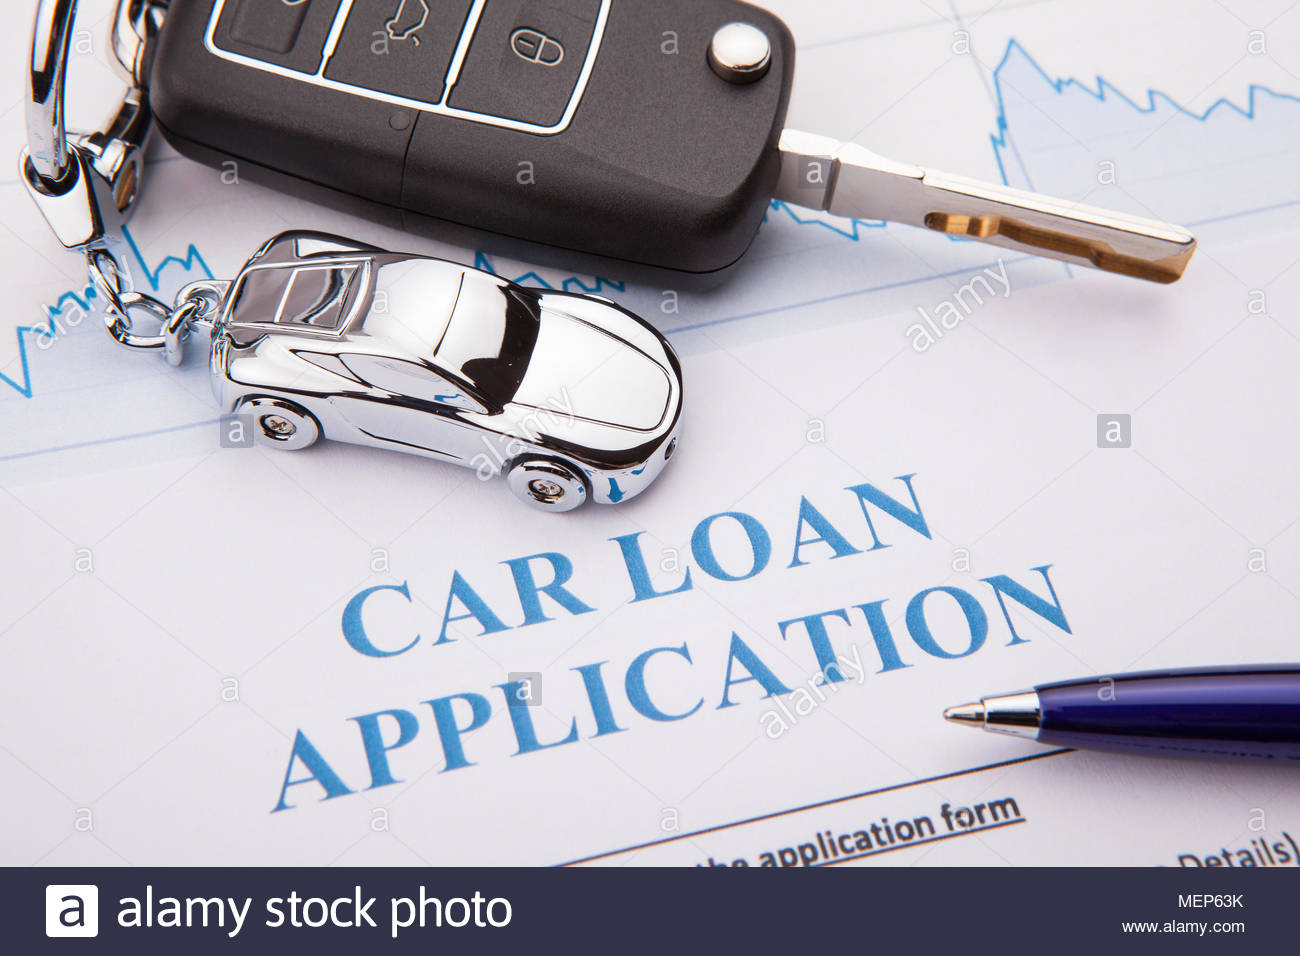 Car Loan Application Form Lay Down On Desk Stock Photo 181196615